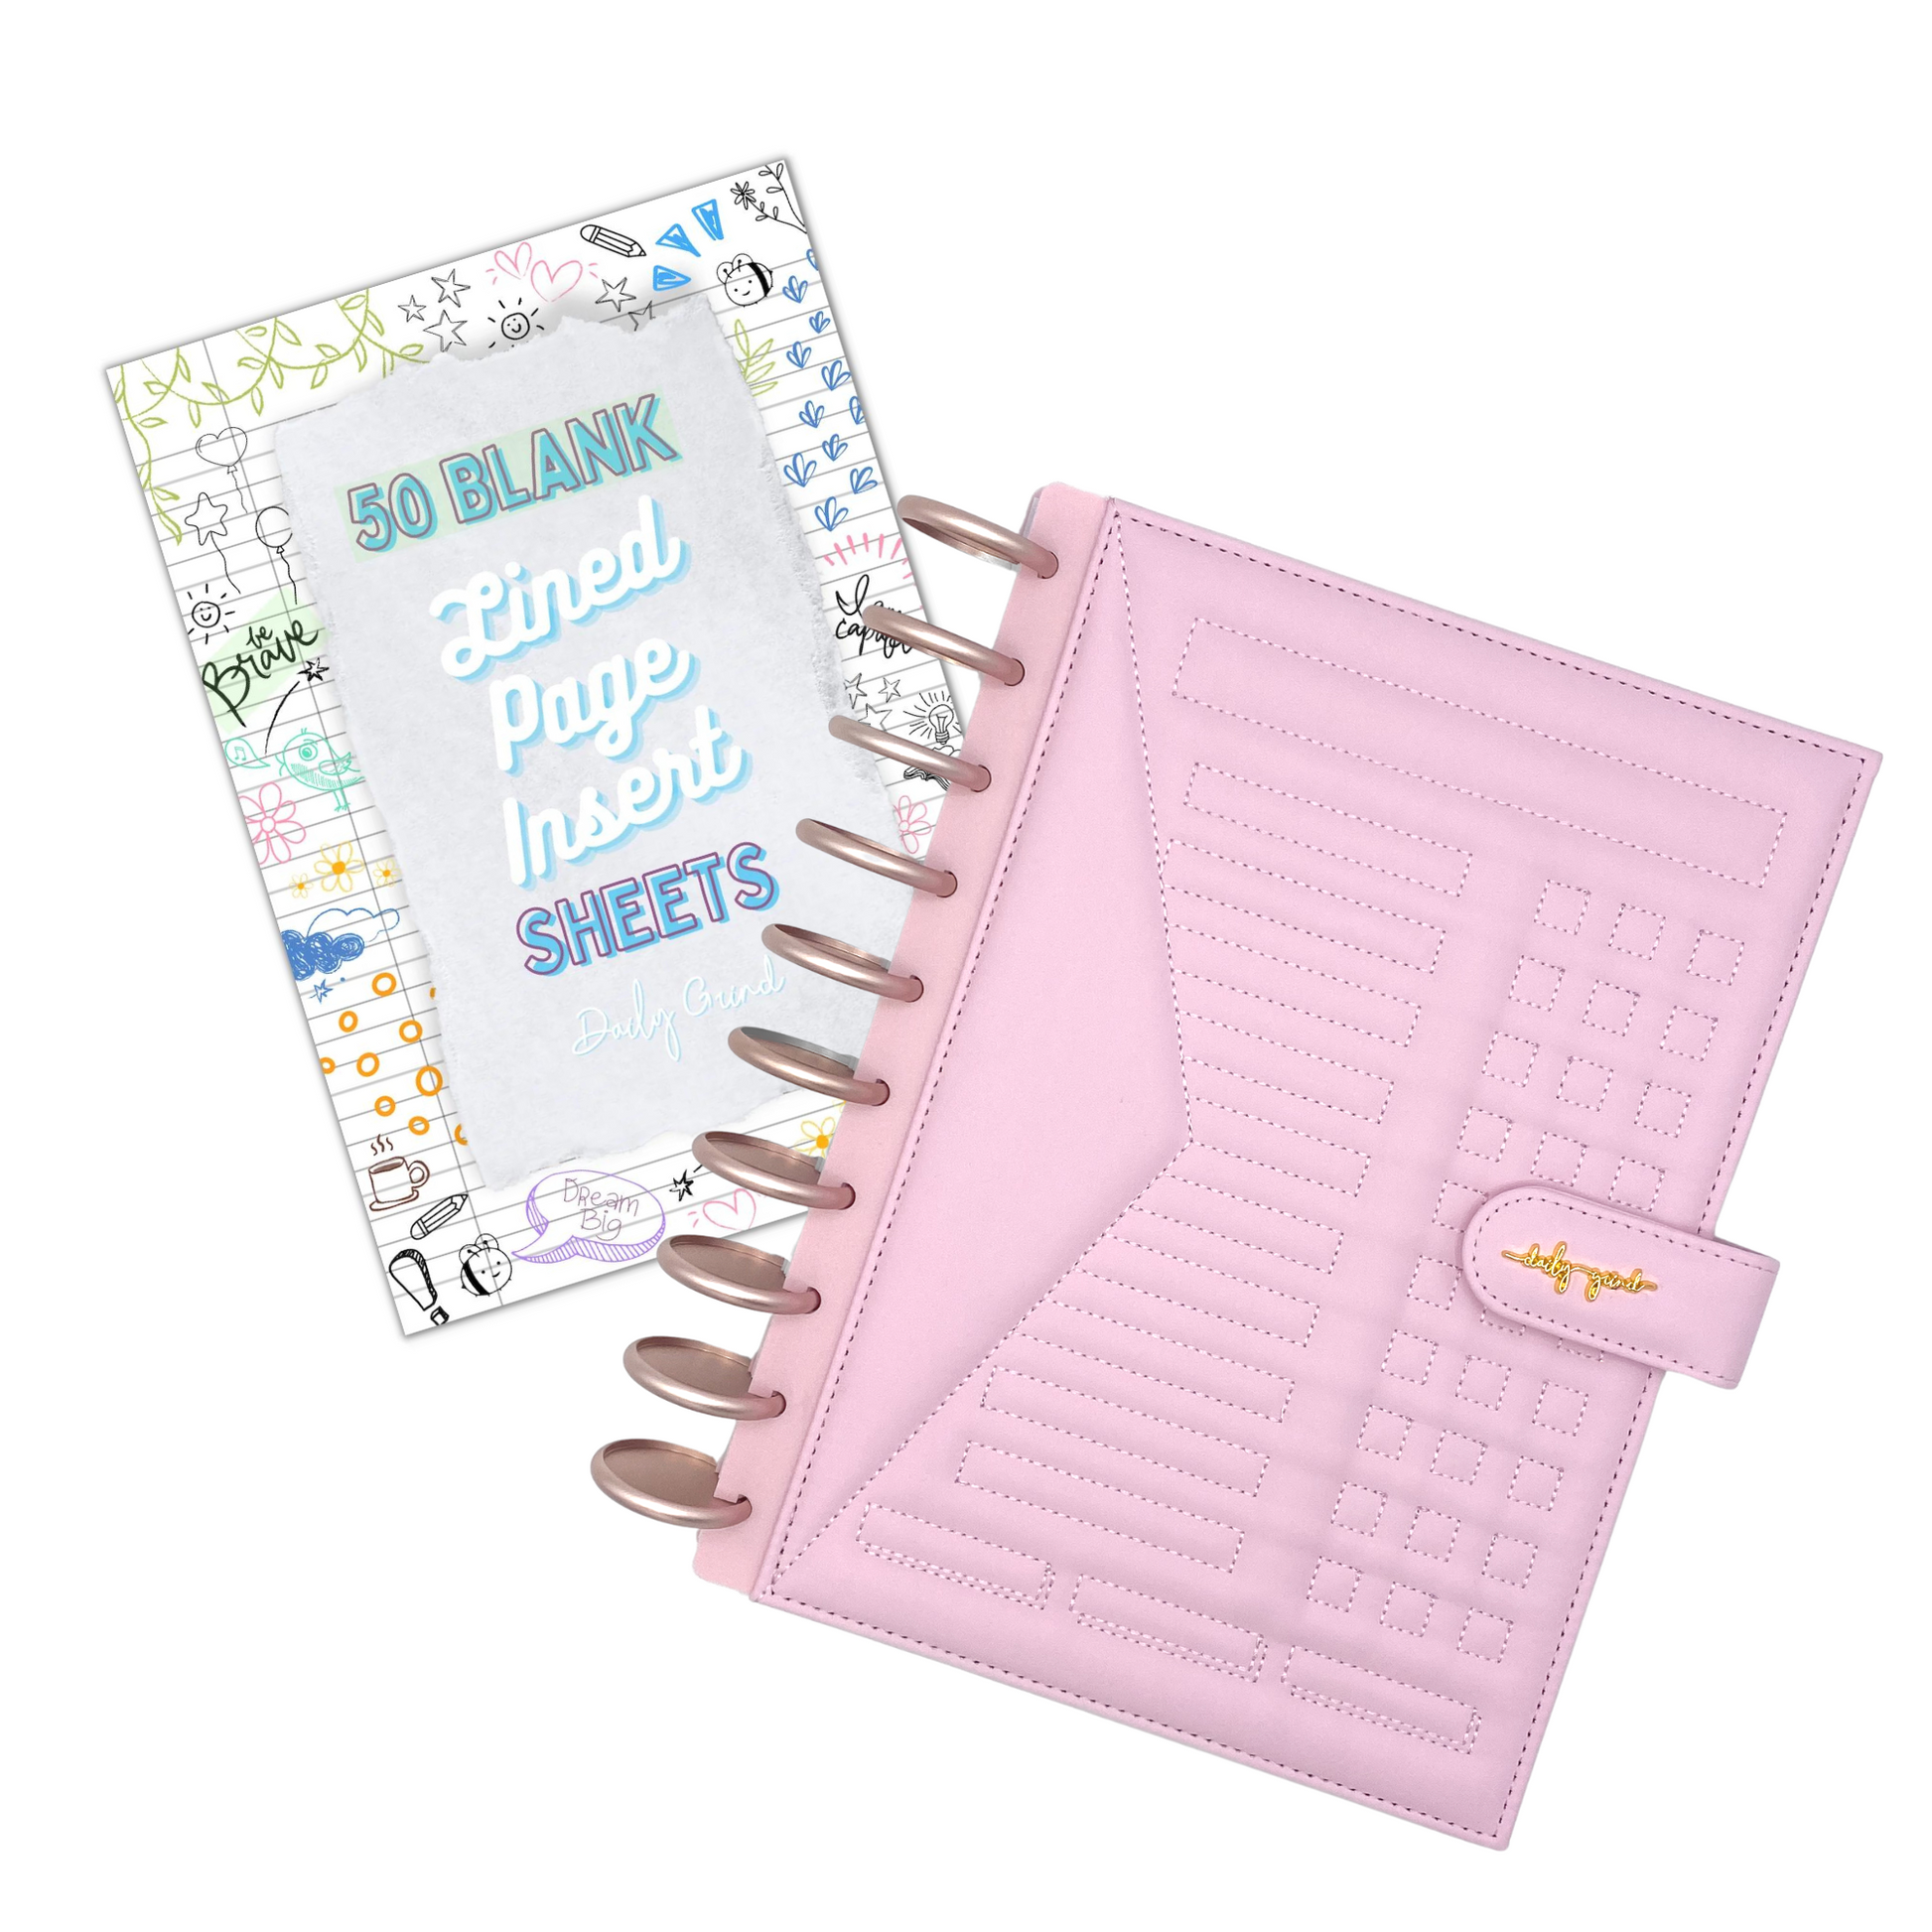 Pink planner and "50 Blank Lined Page Insert Sheets" cover page